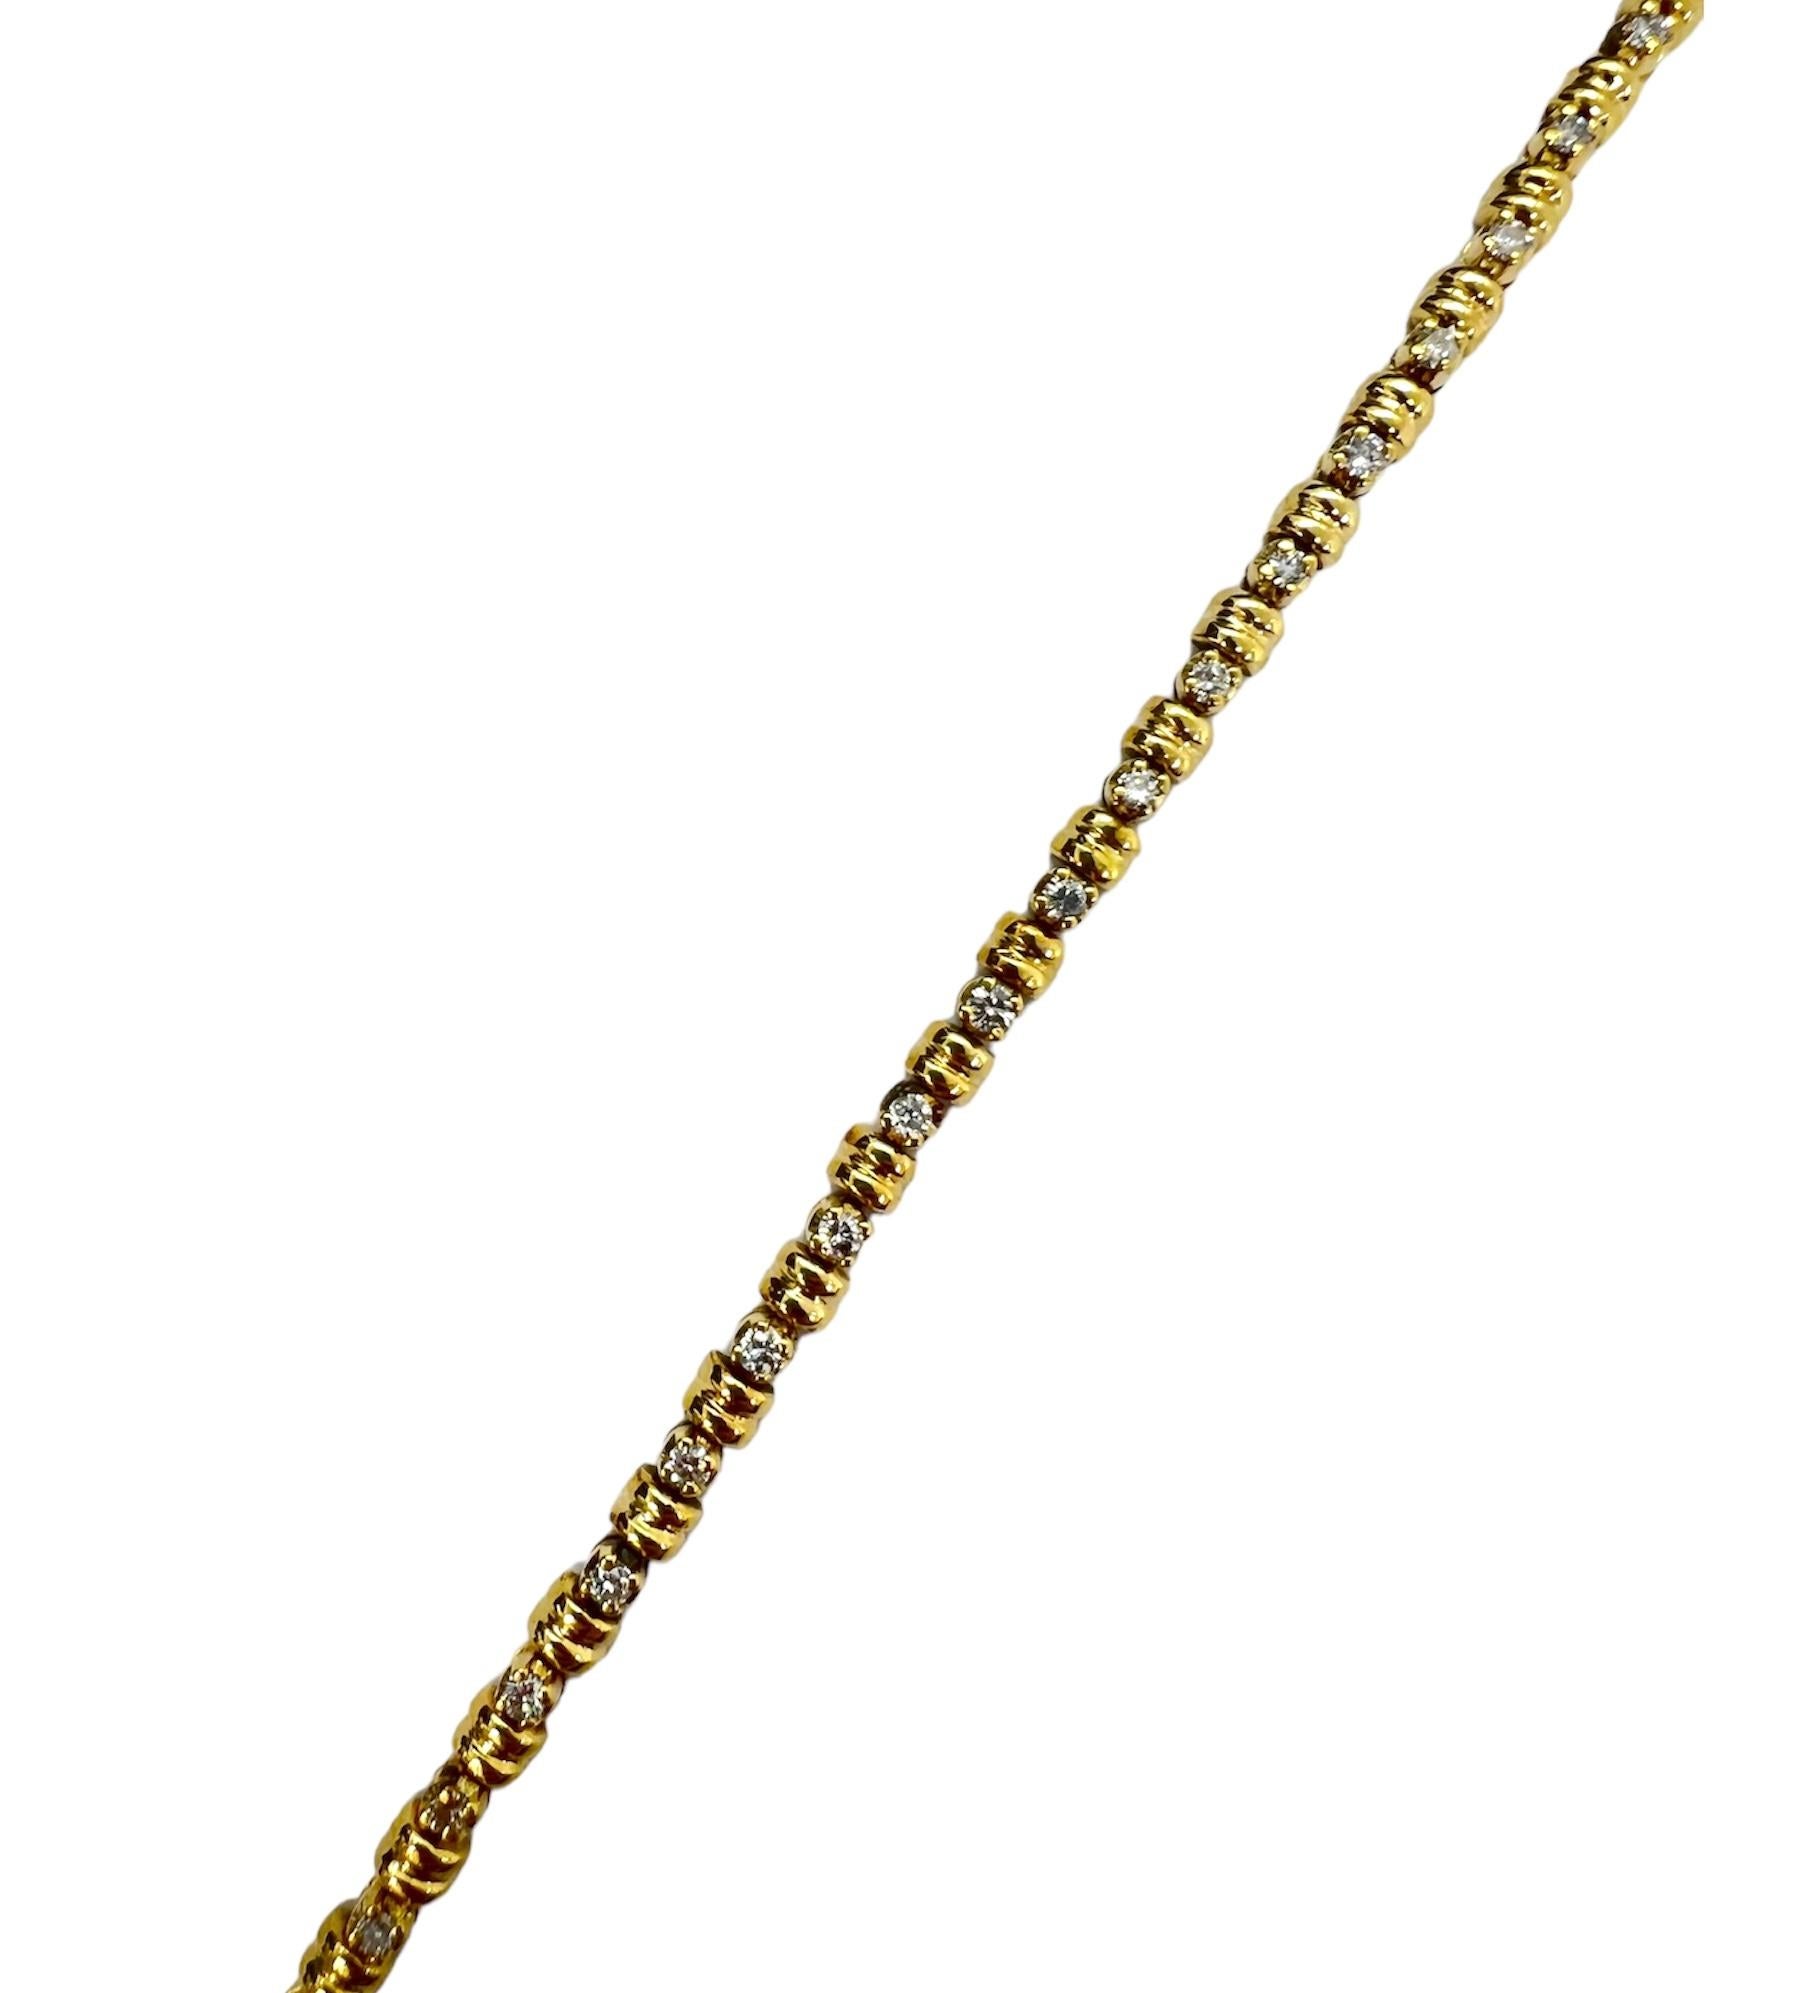 14K yellow gold bracelet with round diamonds.

Sophia D by Joseph Dardashti LTD has been known worldwide for 35 years and are inspired by classic Art Deco design that merges with modern manufacturing techniques.